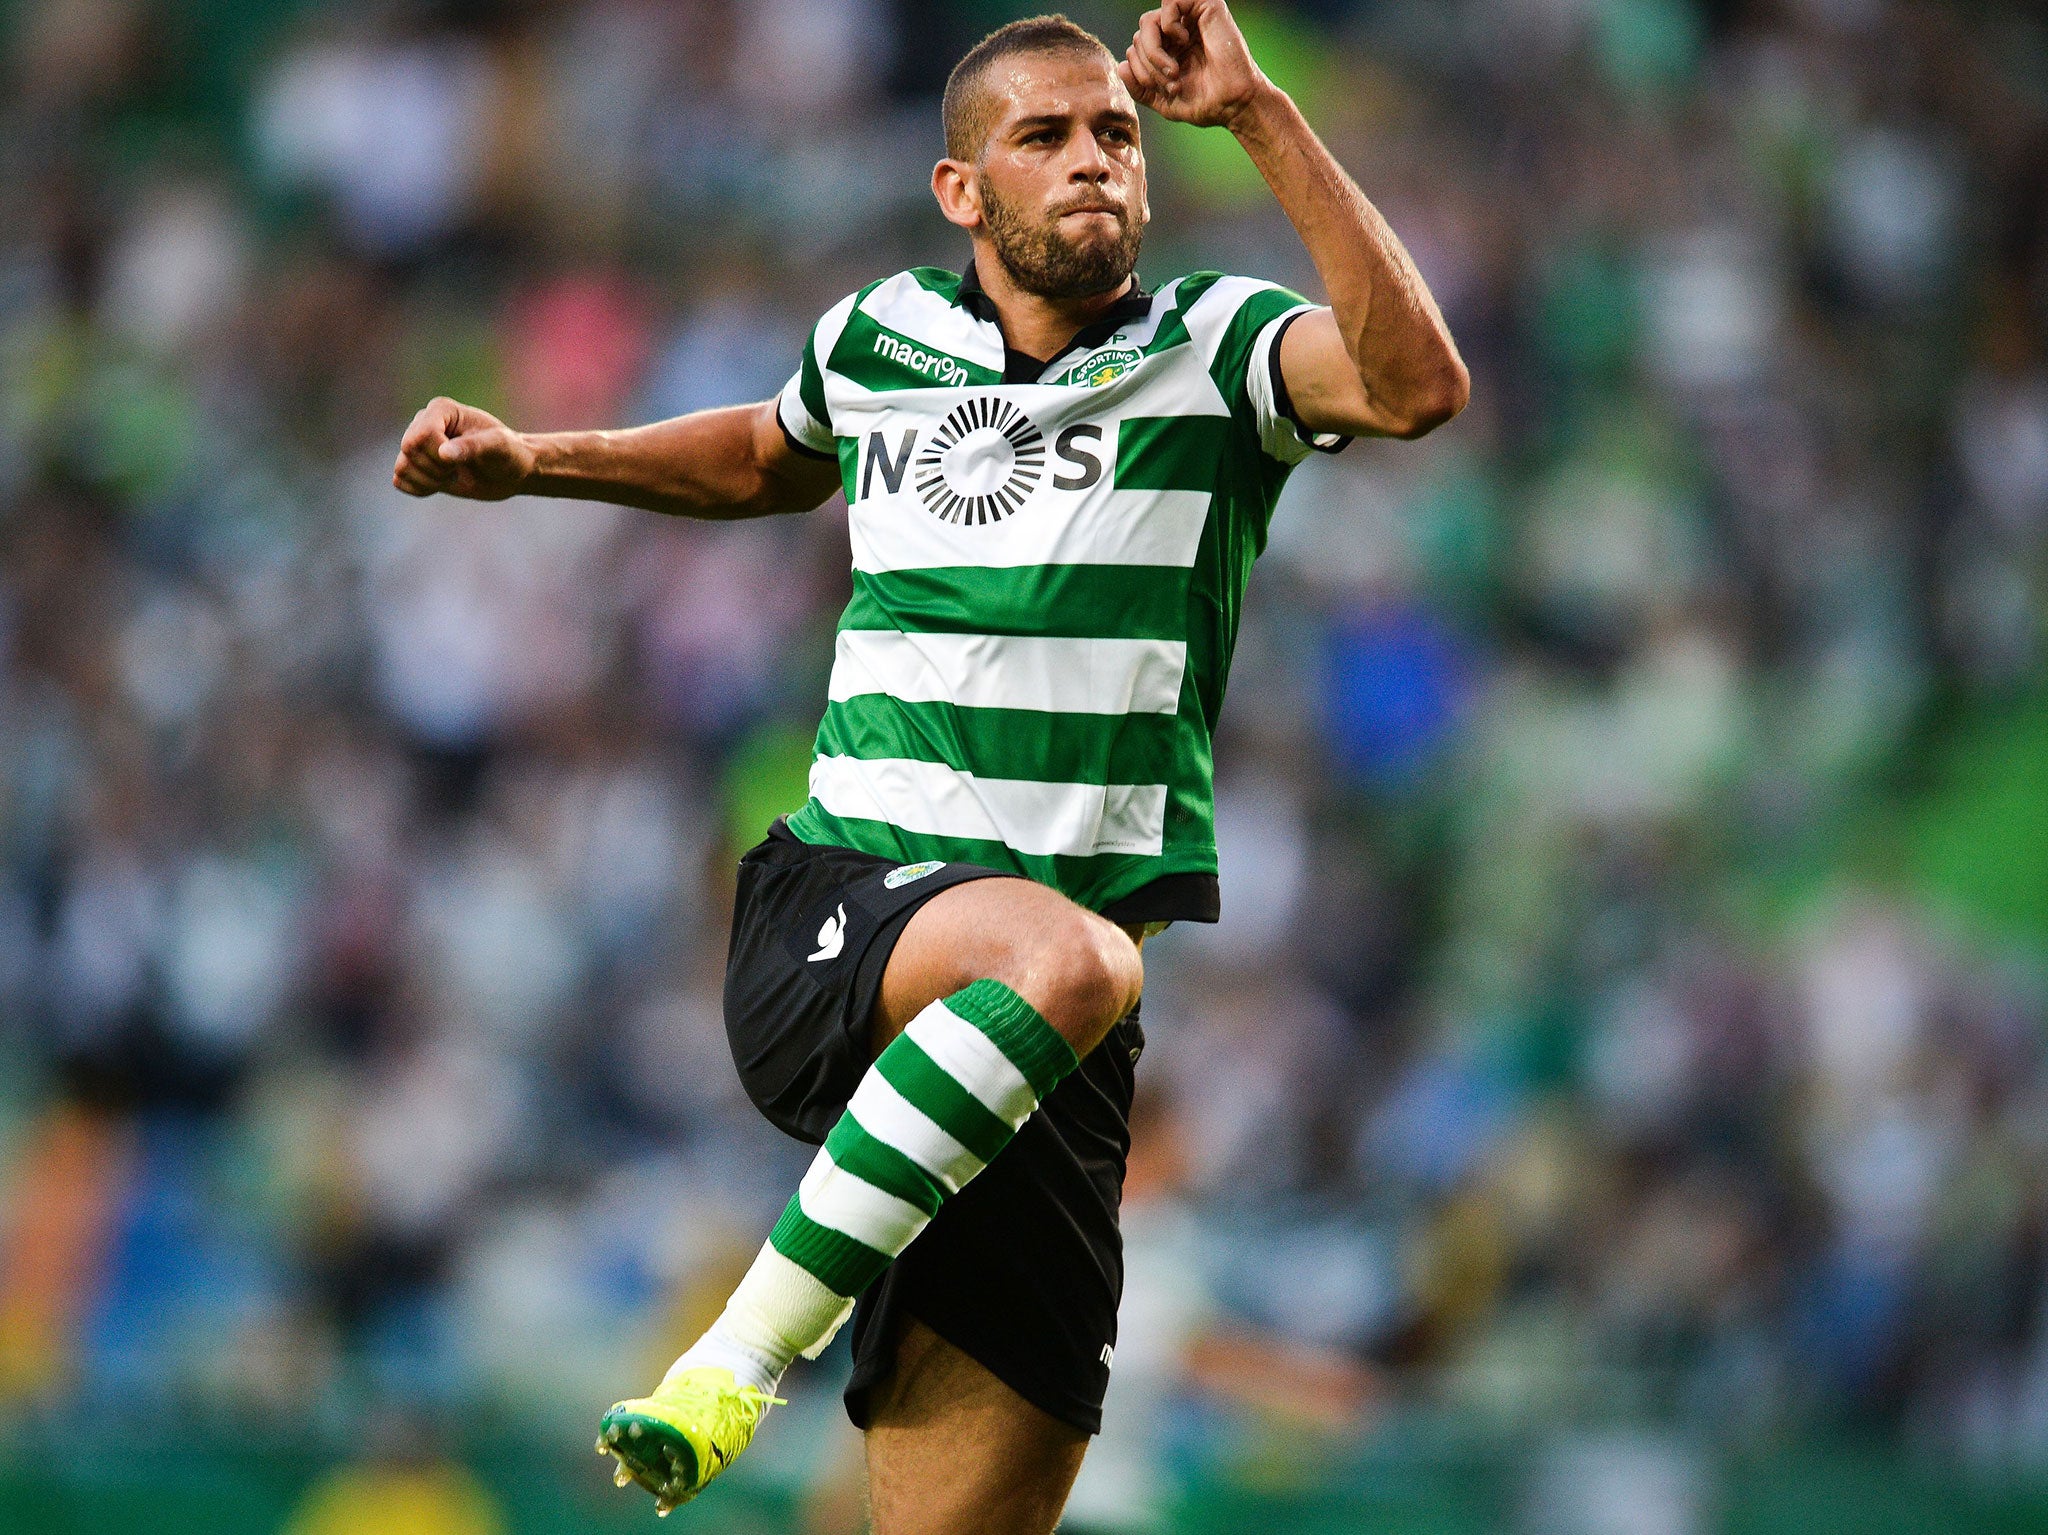 &#13;
Islam Slimani is expected to join Leicester from Sporting Lisbon &#13;